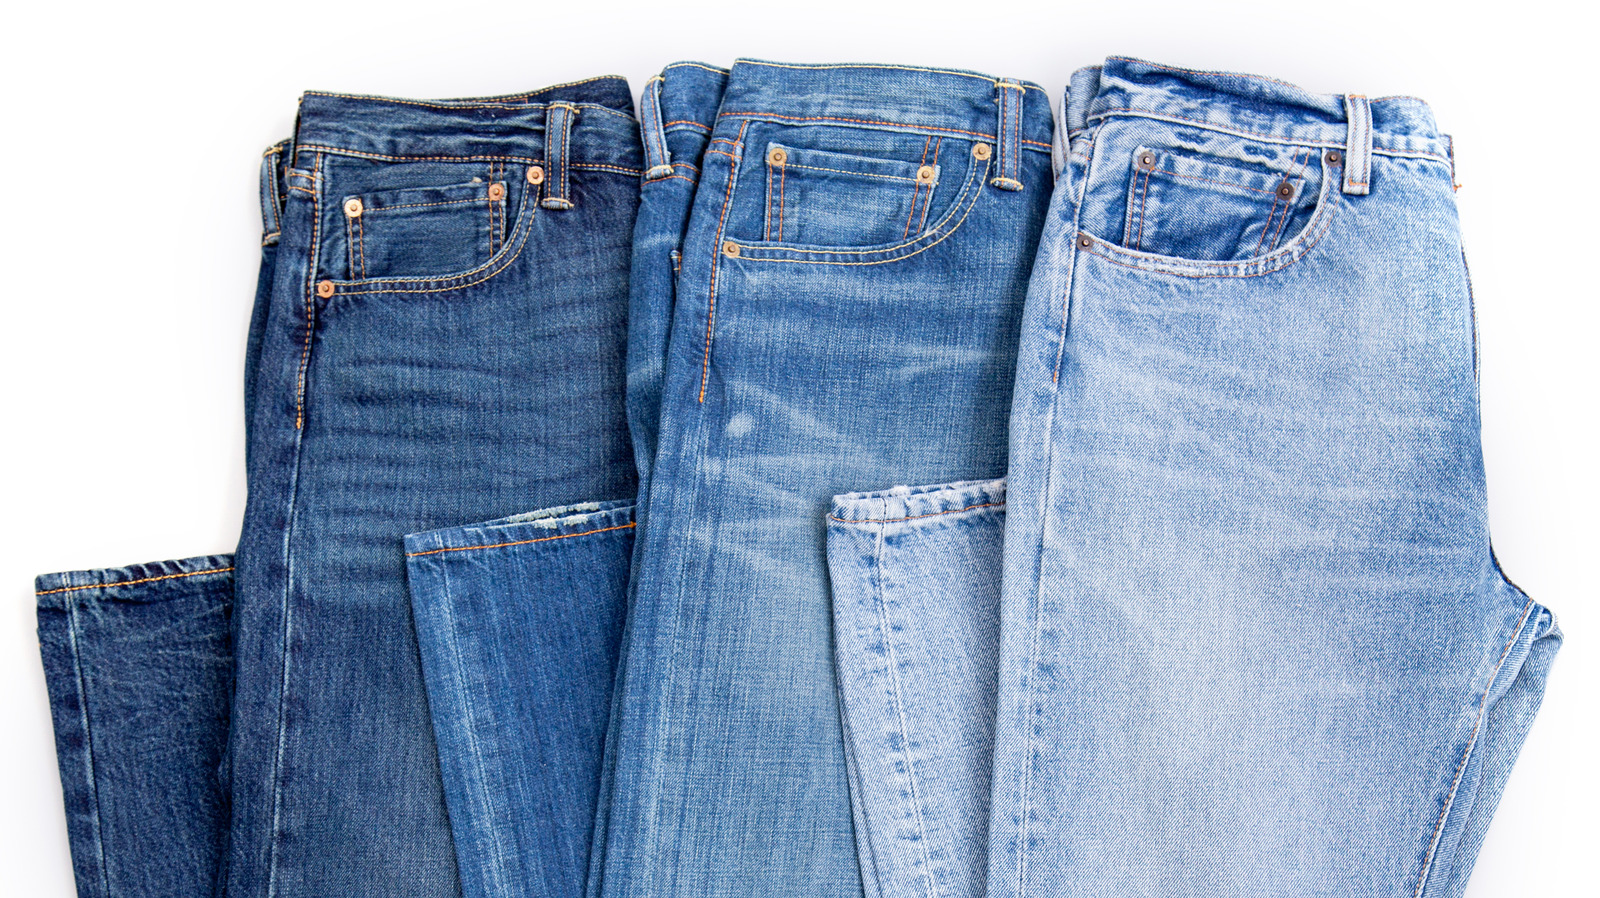 8 Best Jeans for Women according to Fashion Experts in 2022